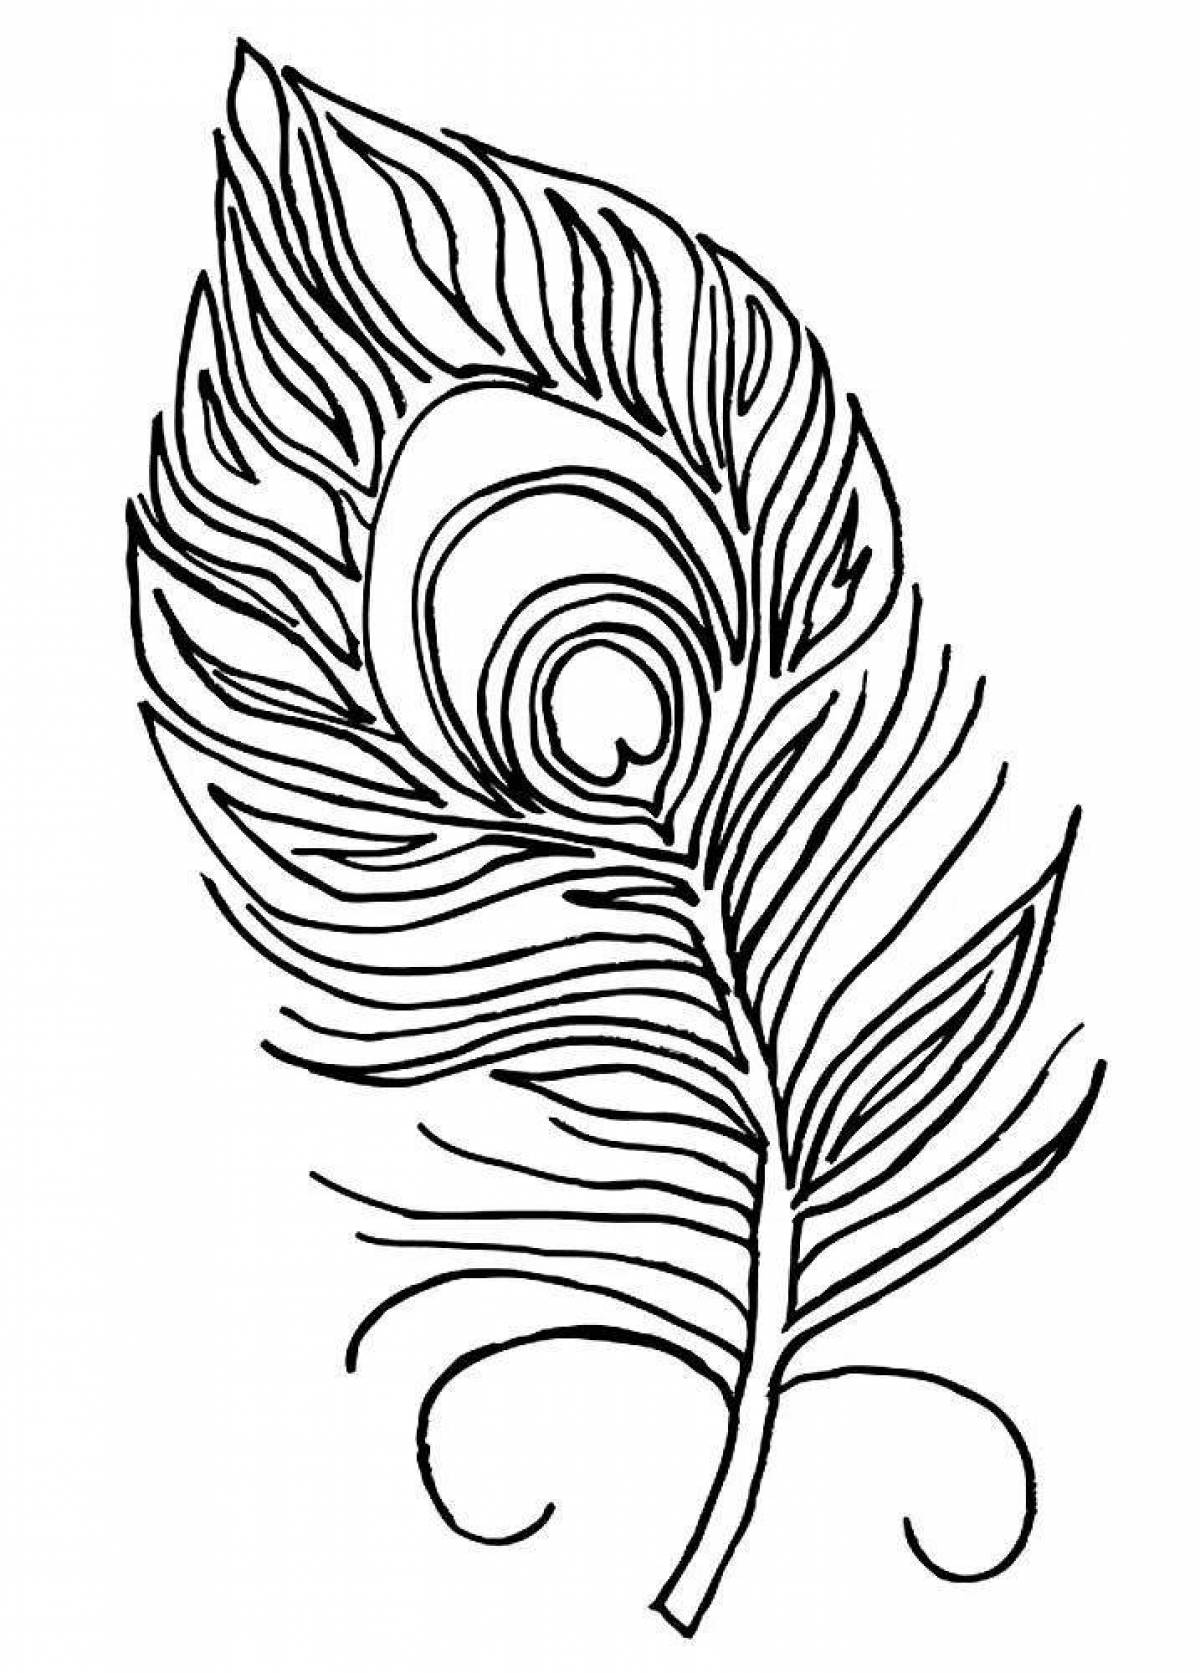 Generous peacock feather coloring page